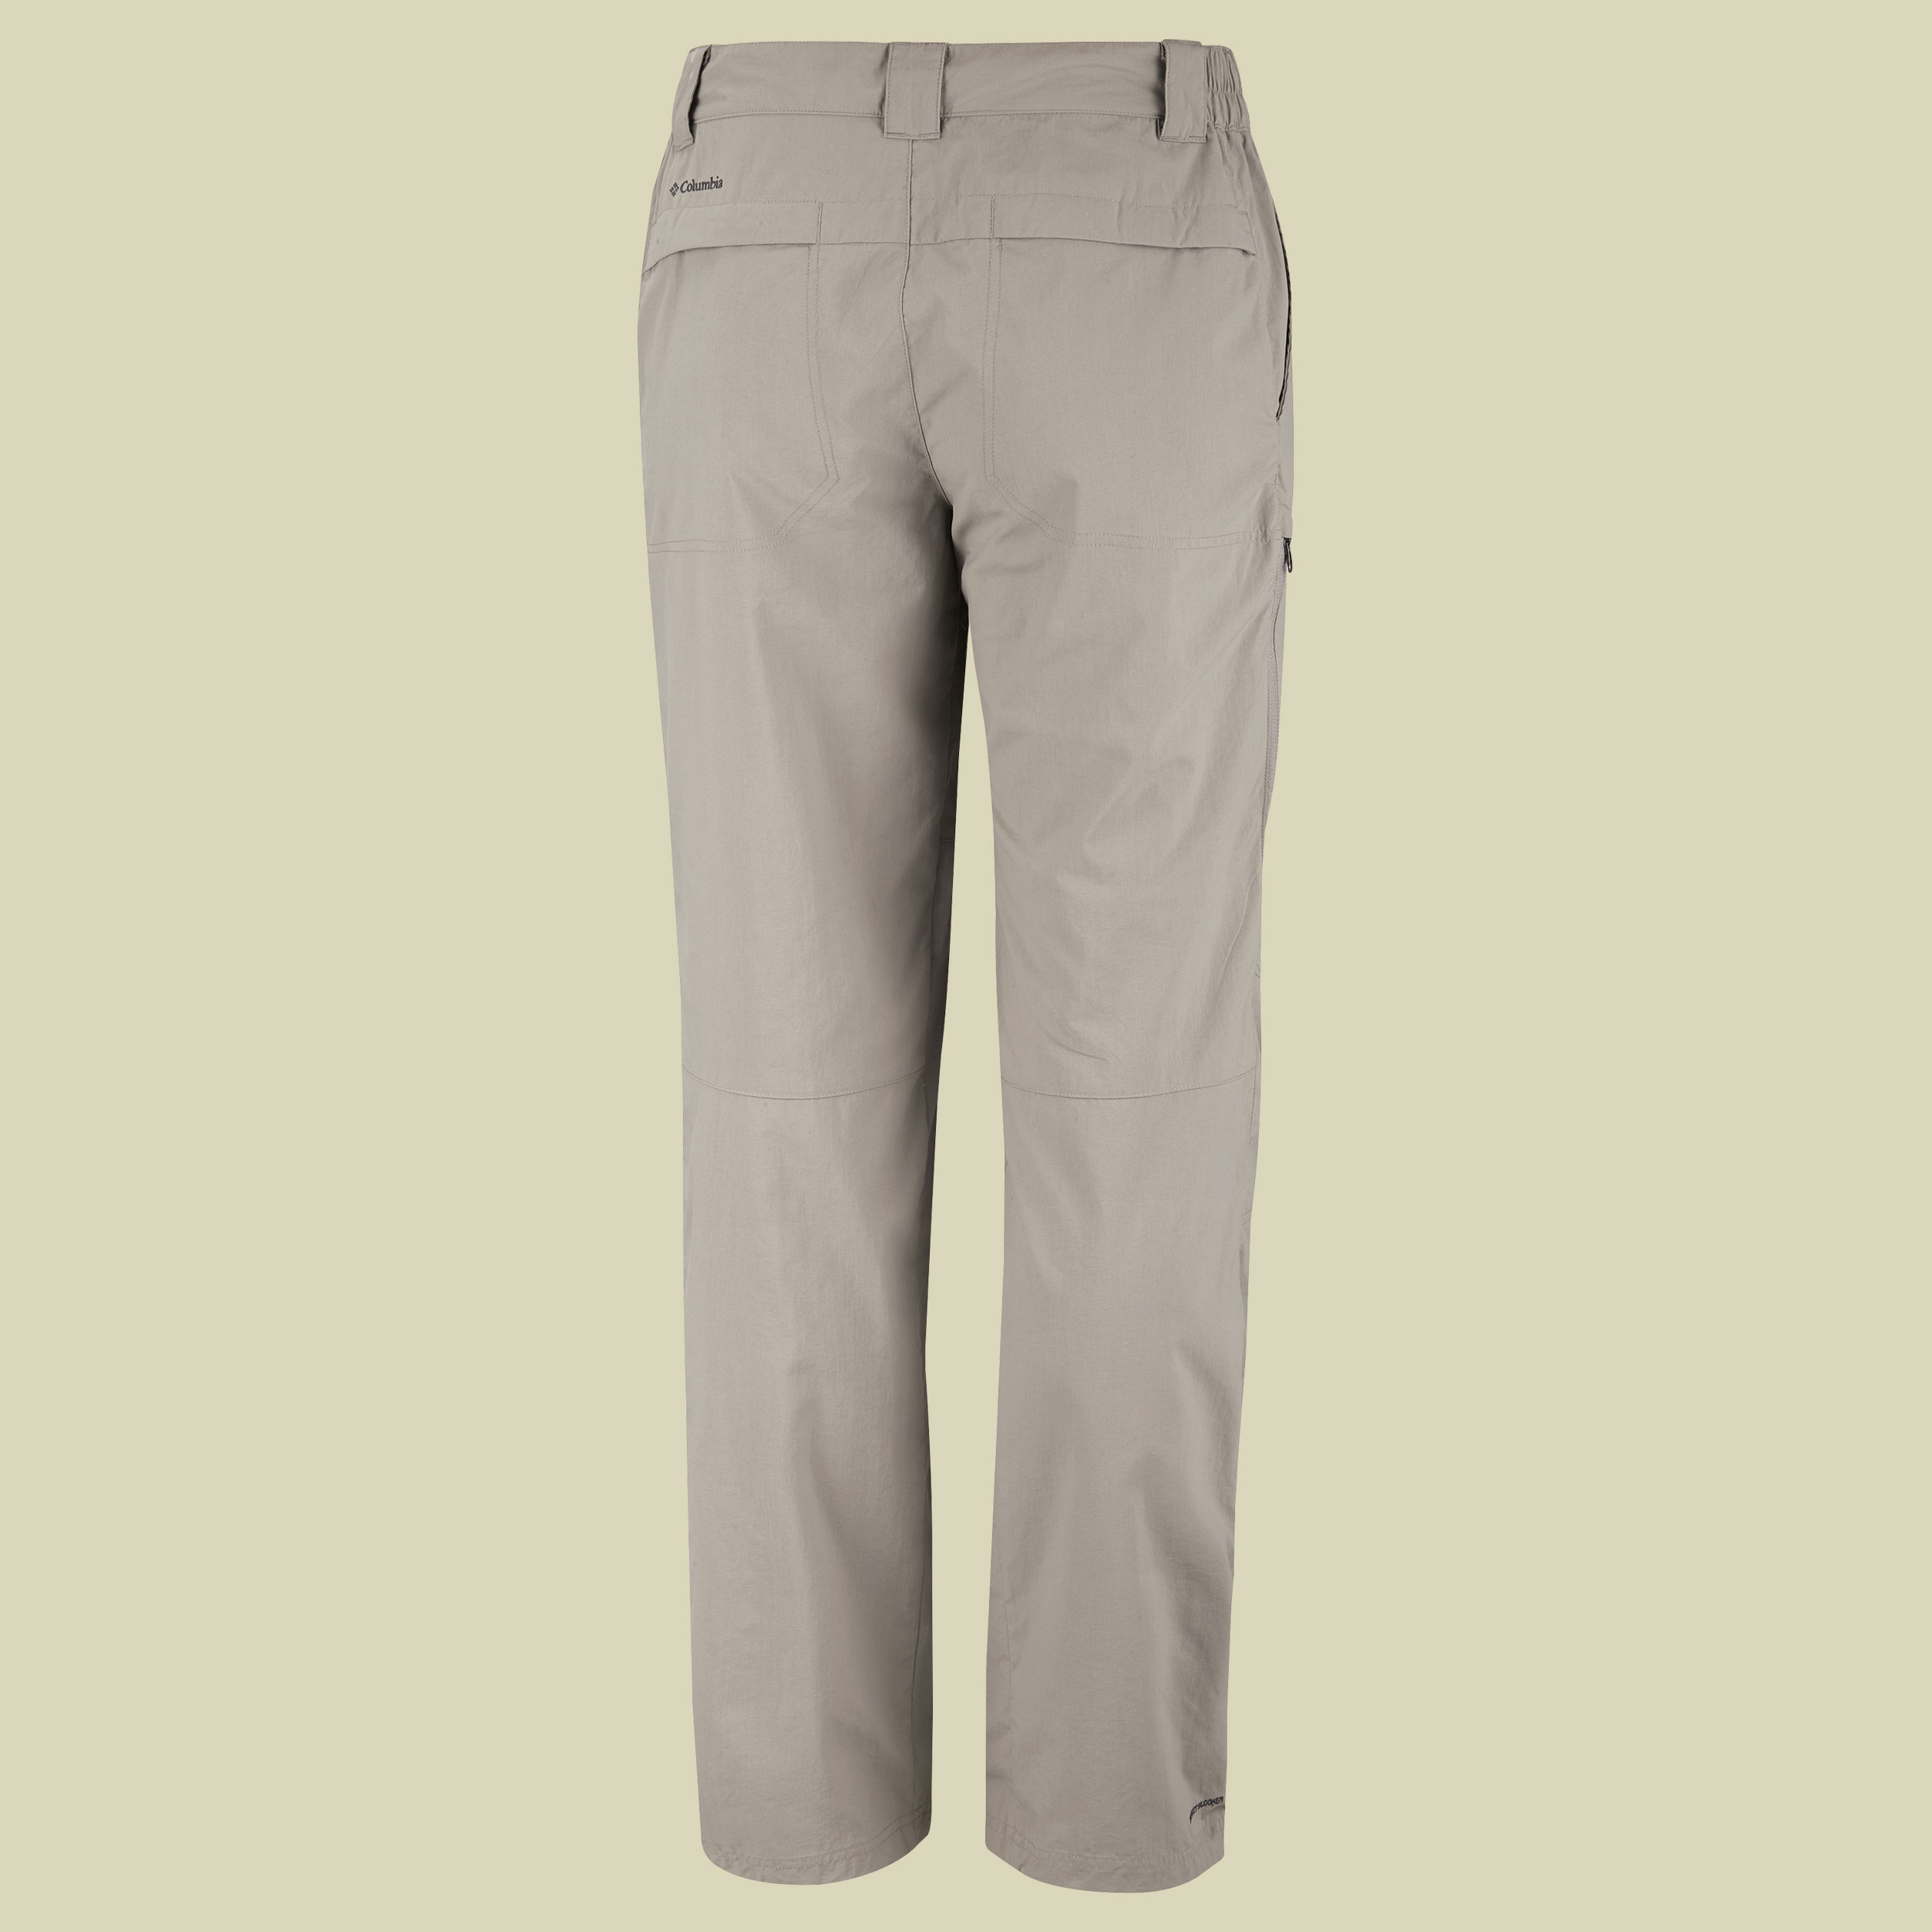 Insect Blocker II Pant Größe 38 Farbe tusk